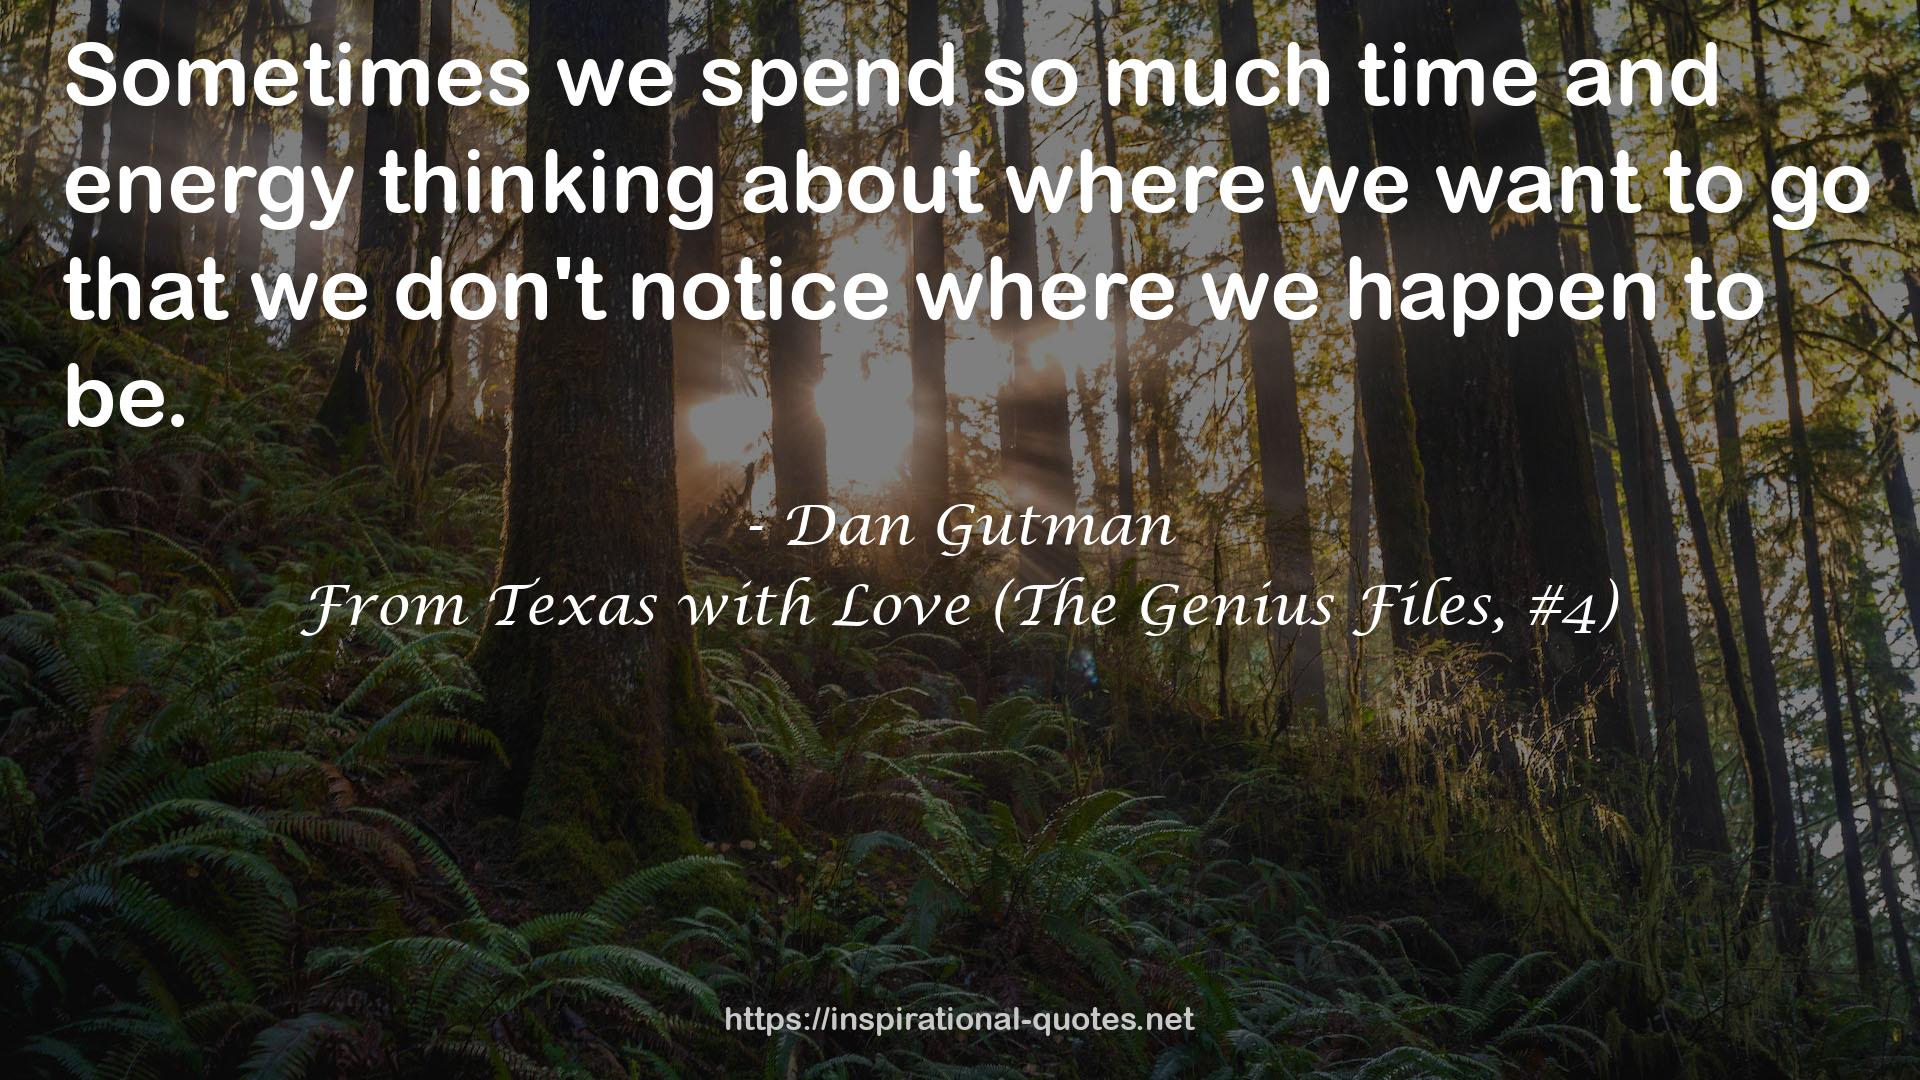 From Texas with Love (The Genius Files, #4) QUOTES